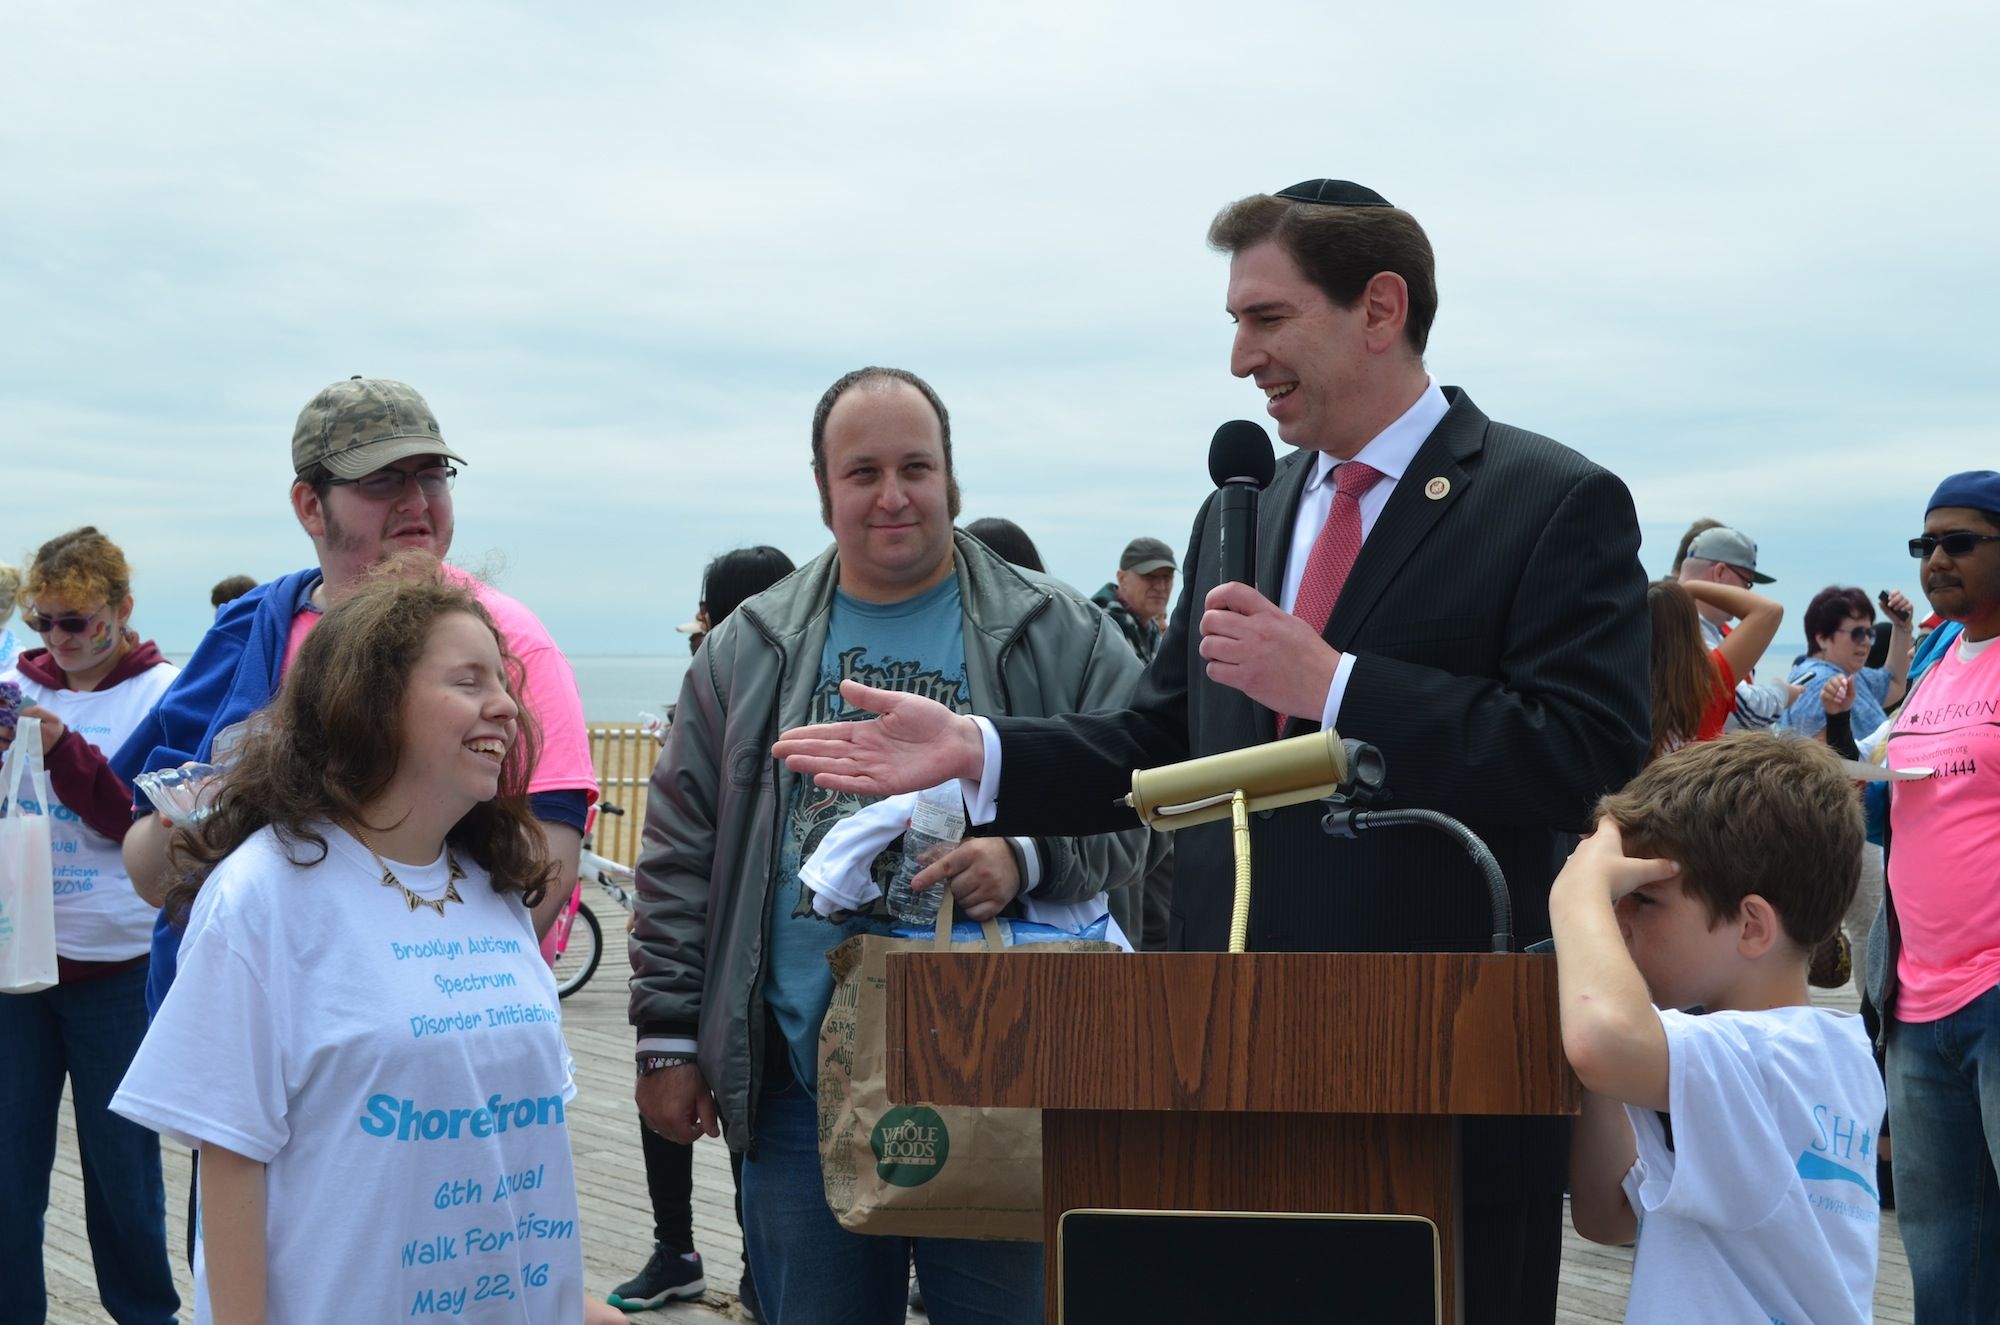 Shorefront Y’s Annual Walk For Autism Raises Funds And Awareness For Children With Special Needs